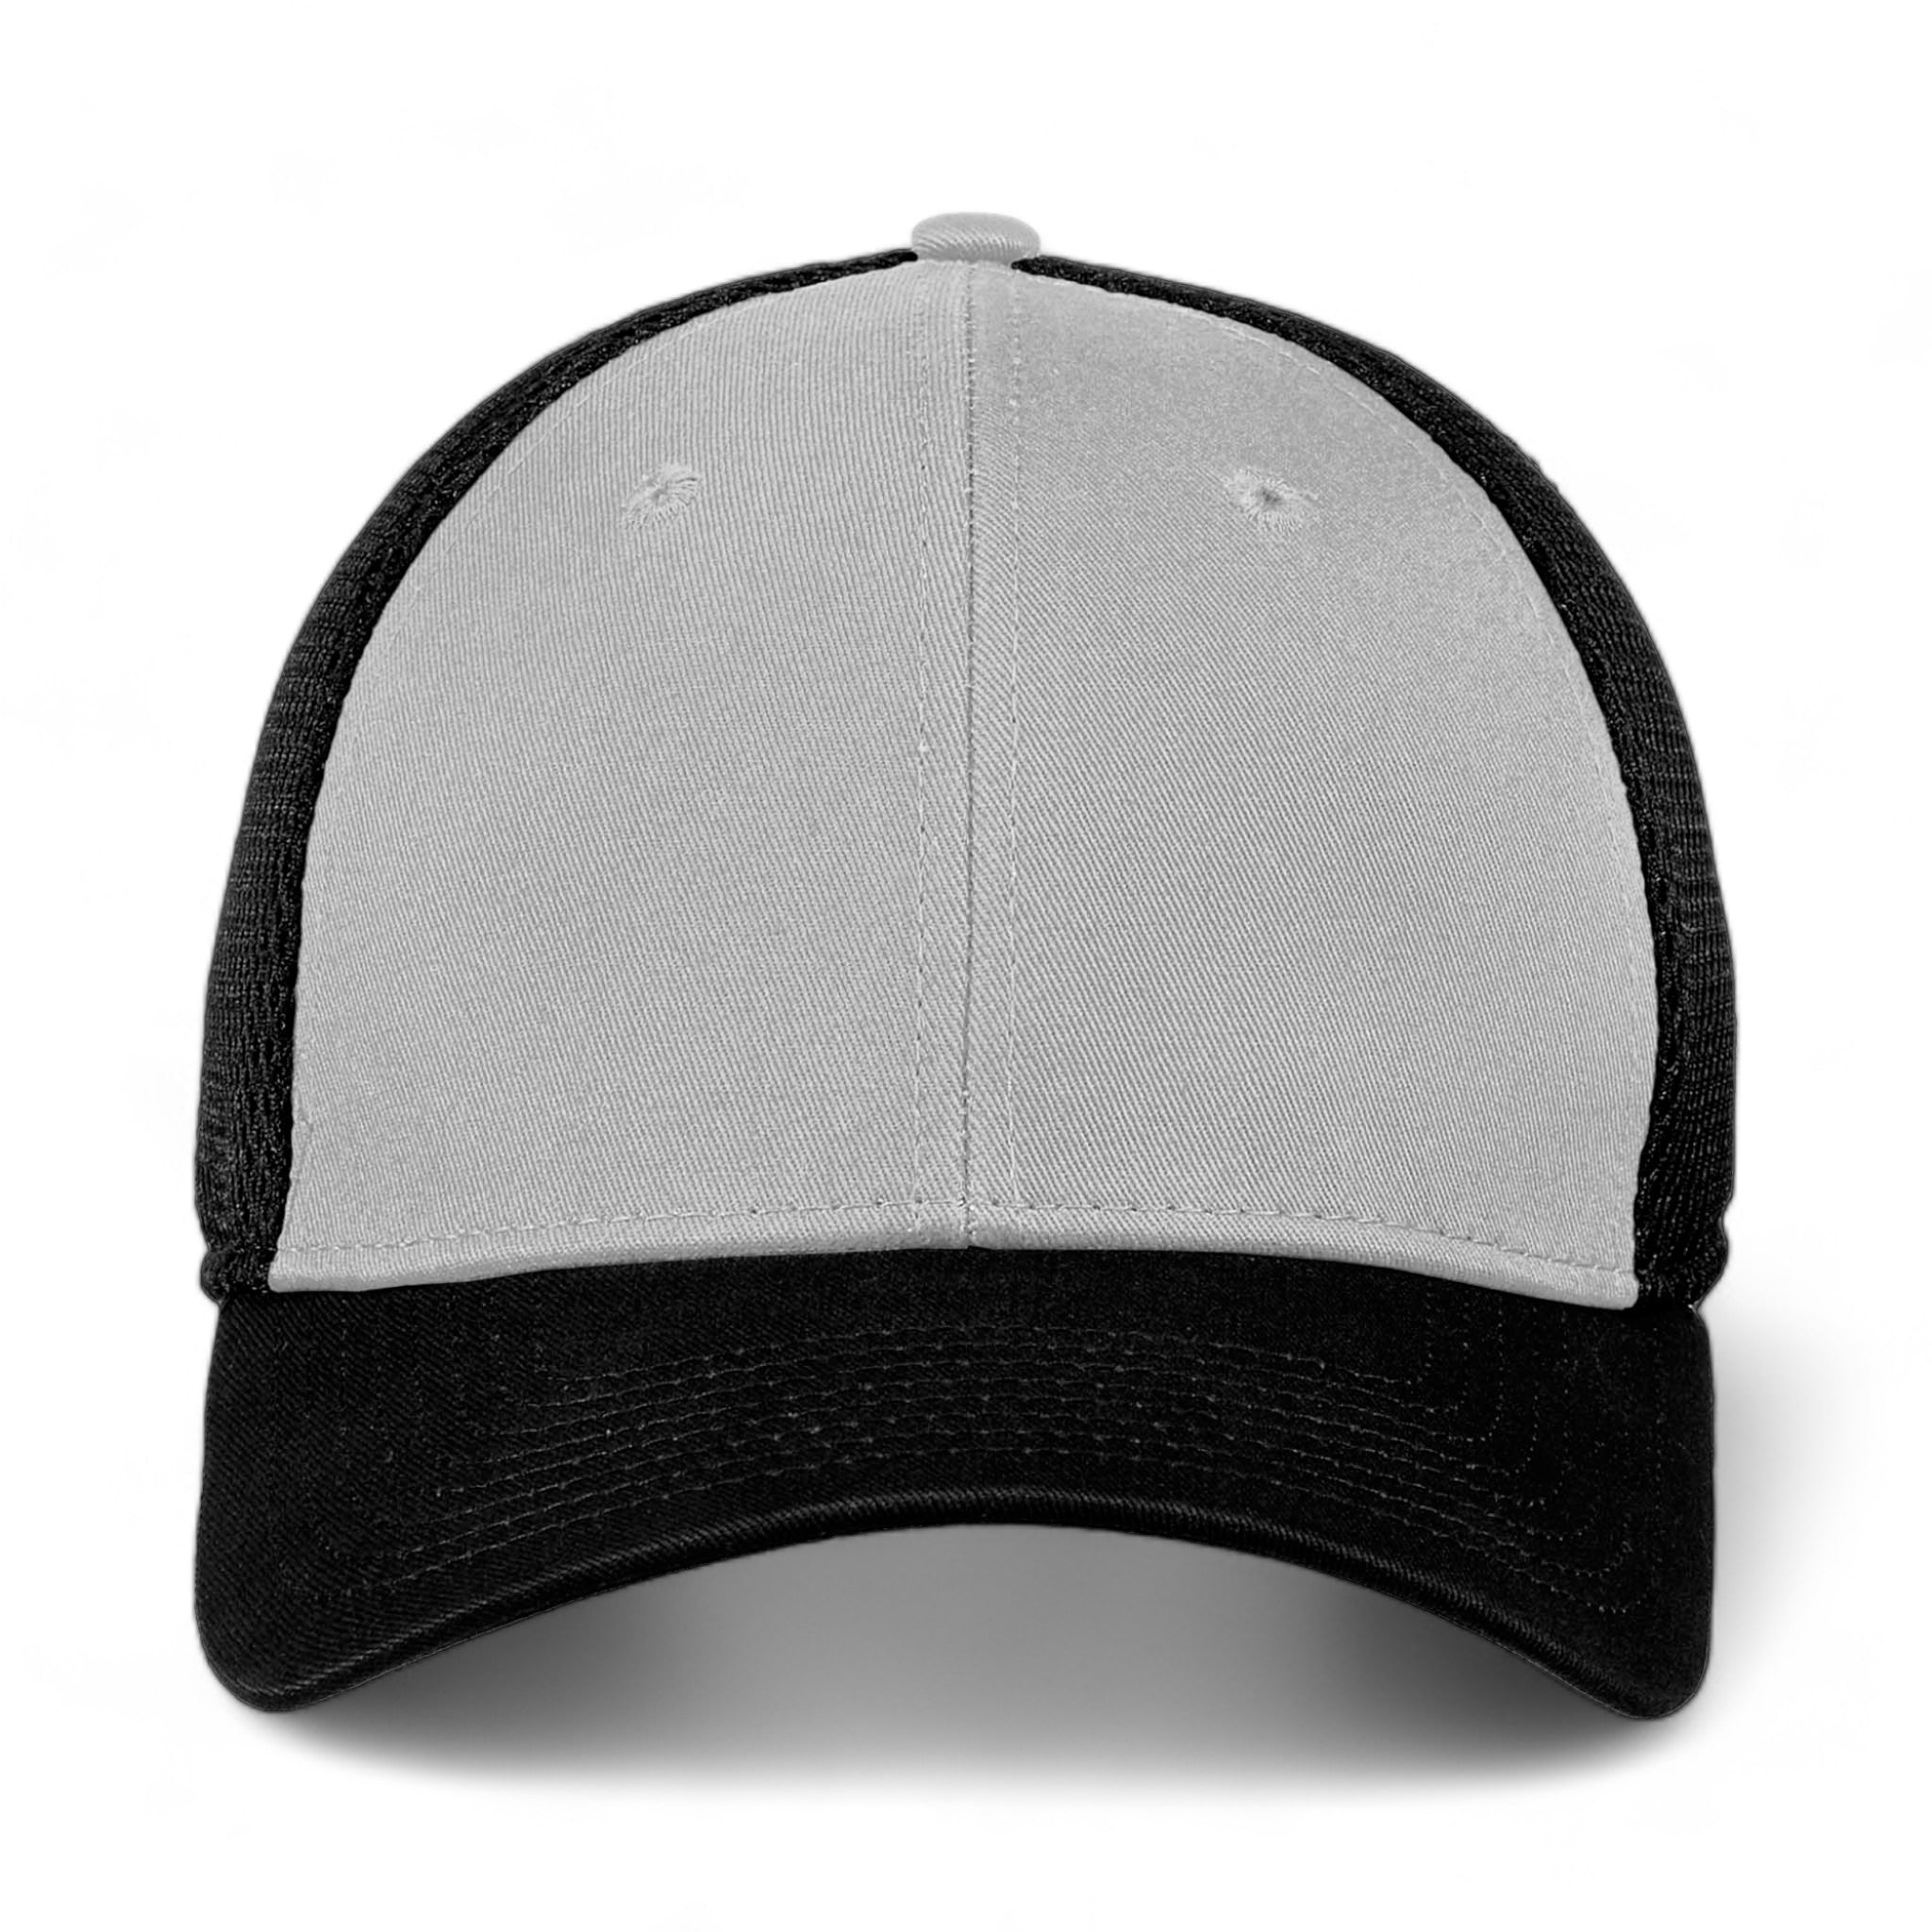 Front view of New Era NE1020 custom hat in grey and black